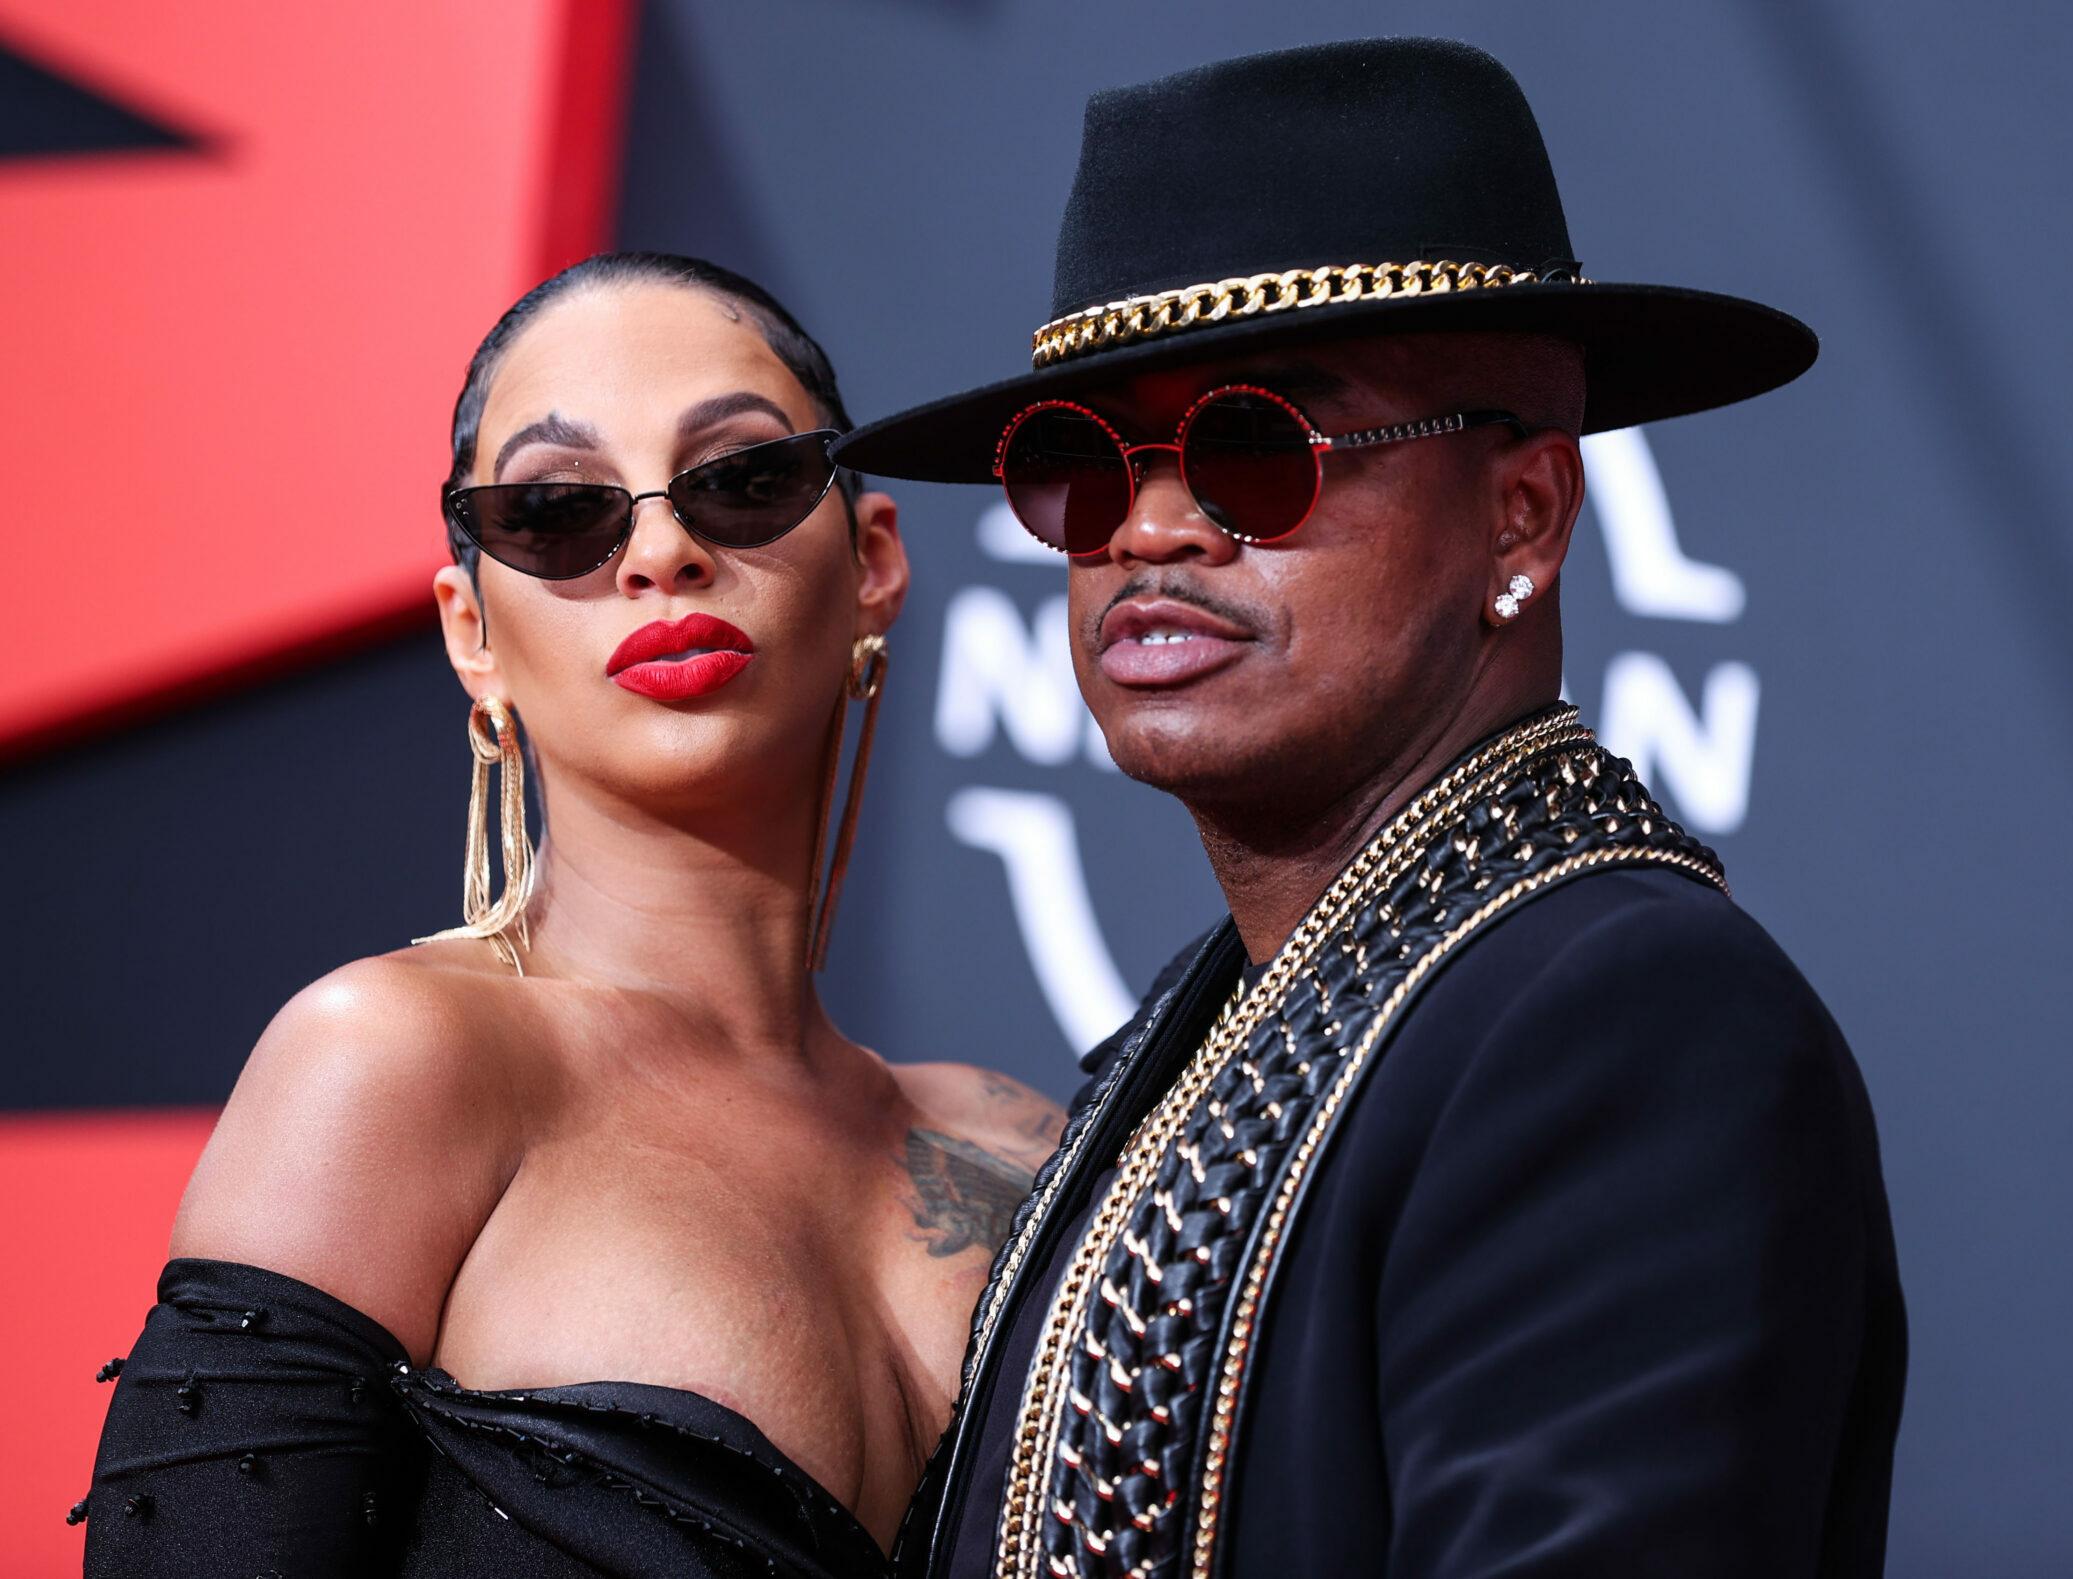 BET Awards 2022 held at Microsoft Theater at L.A. Live on June 26, 2022 in Los Angeles, California, United States. 27 Jun 2022 Pictured: Crystal Smith, Ne-Yo.